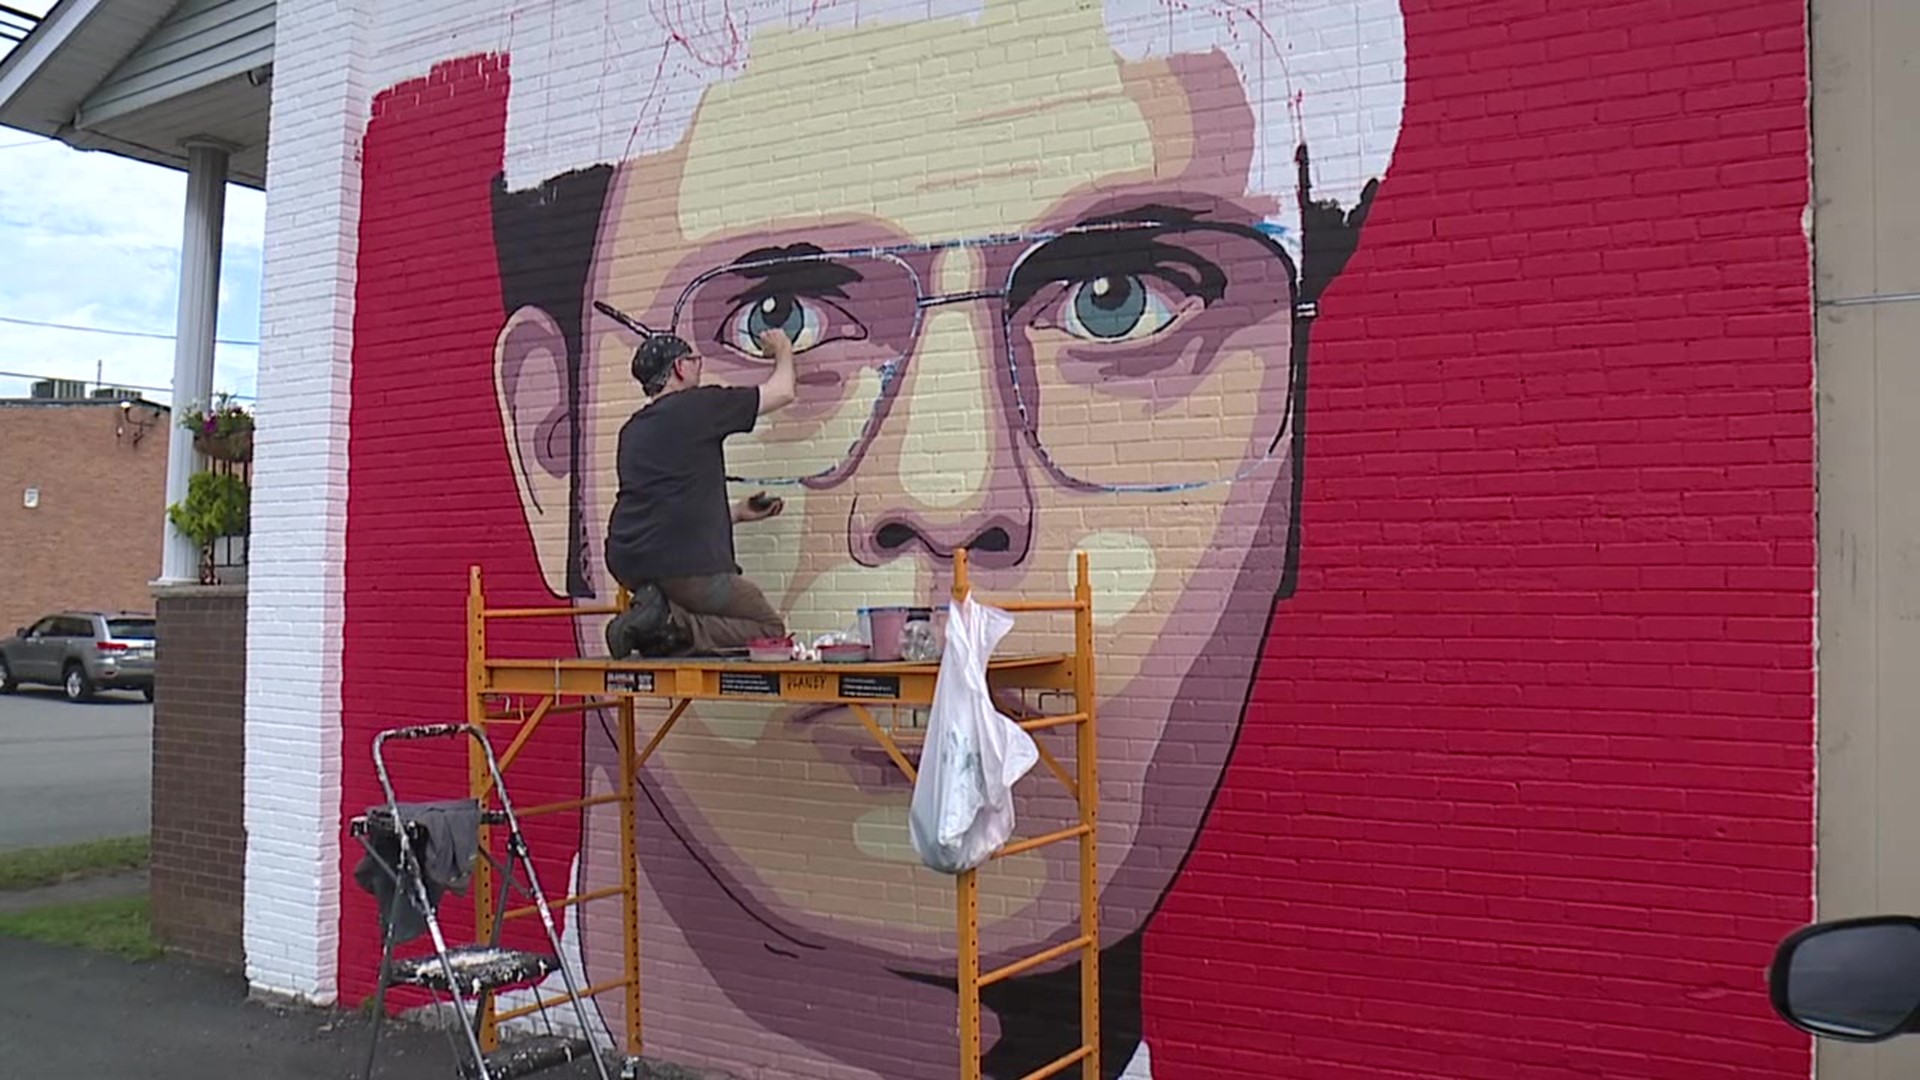 Dwight Schrute returns to Scranton in the form of a new mural being painted on a shop wall.